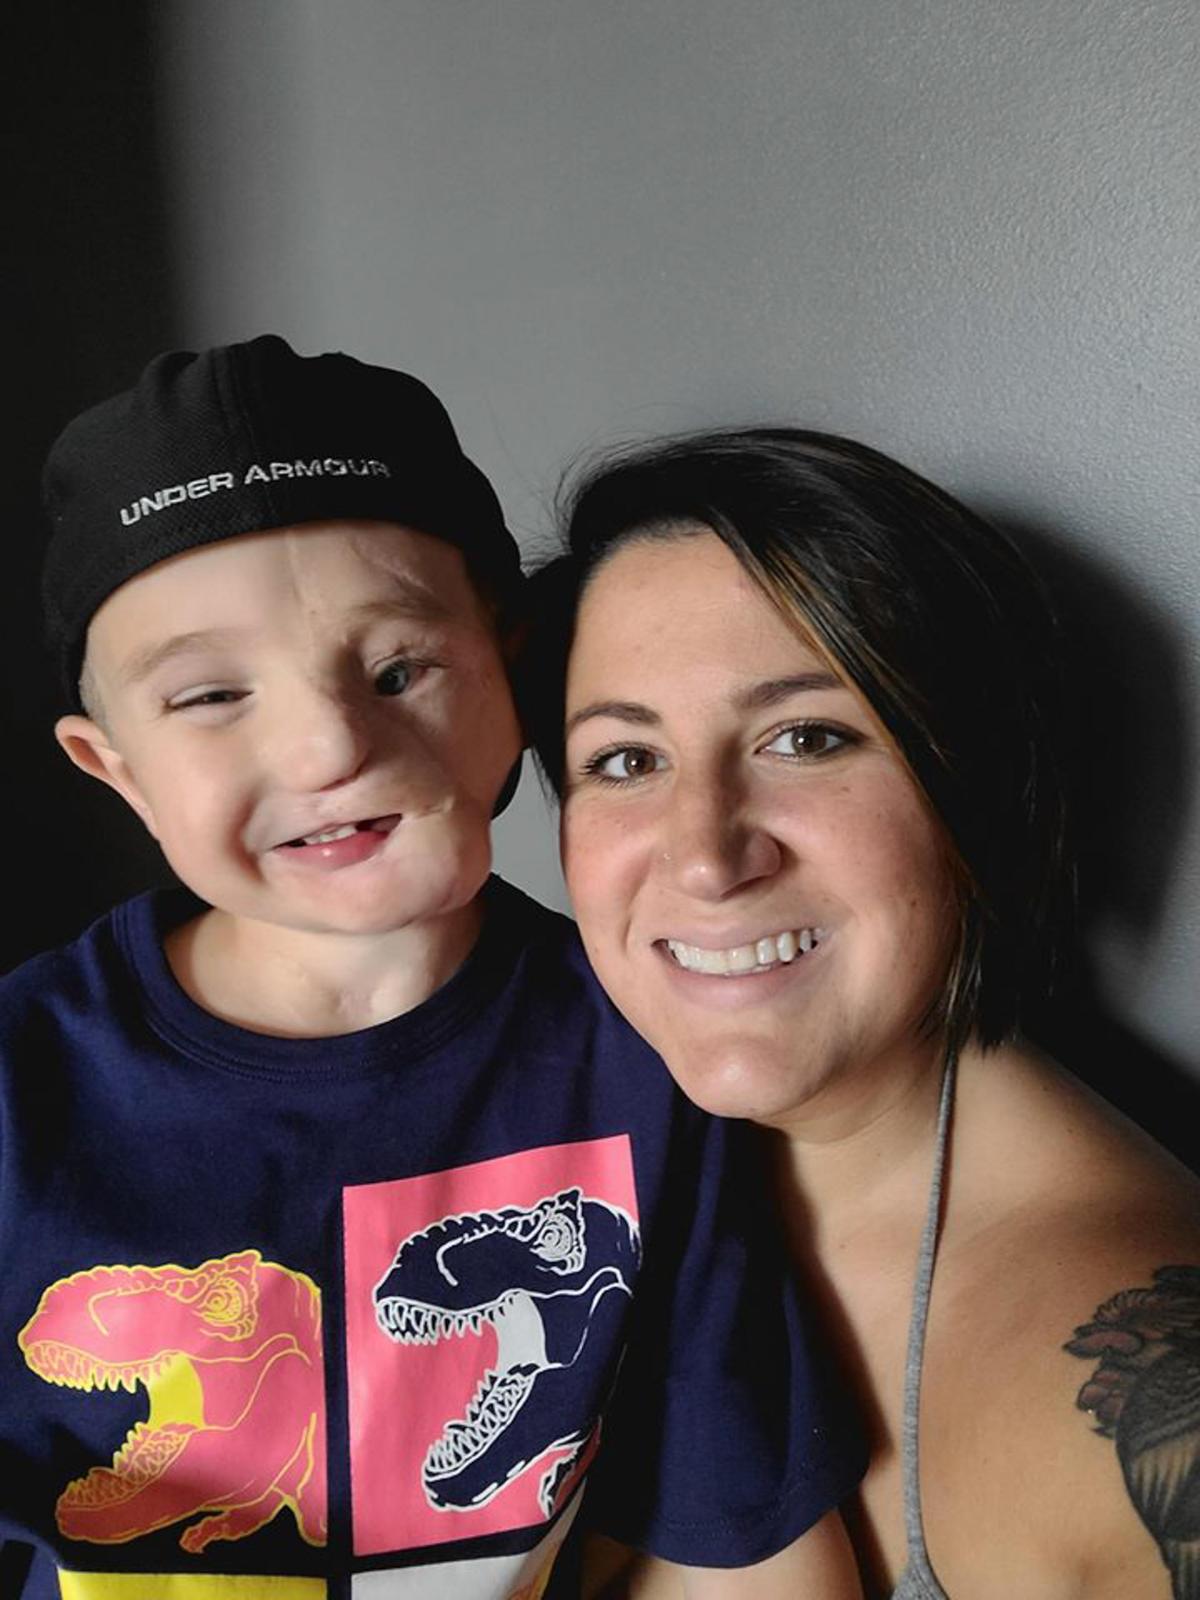 "The doctors said they would do what they could but we weren't expecting him to make it," Brittany said. "They said it's a miracle that he's still here because he was so small and the injuries were so severe." (Caters News)